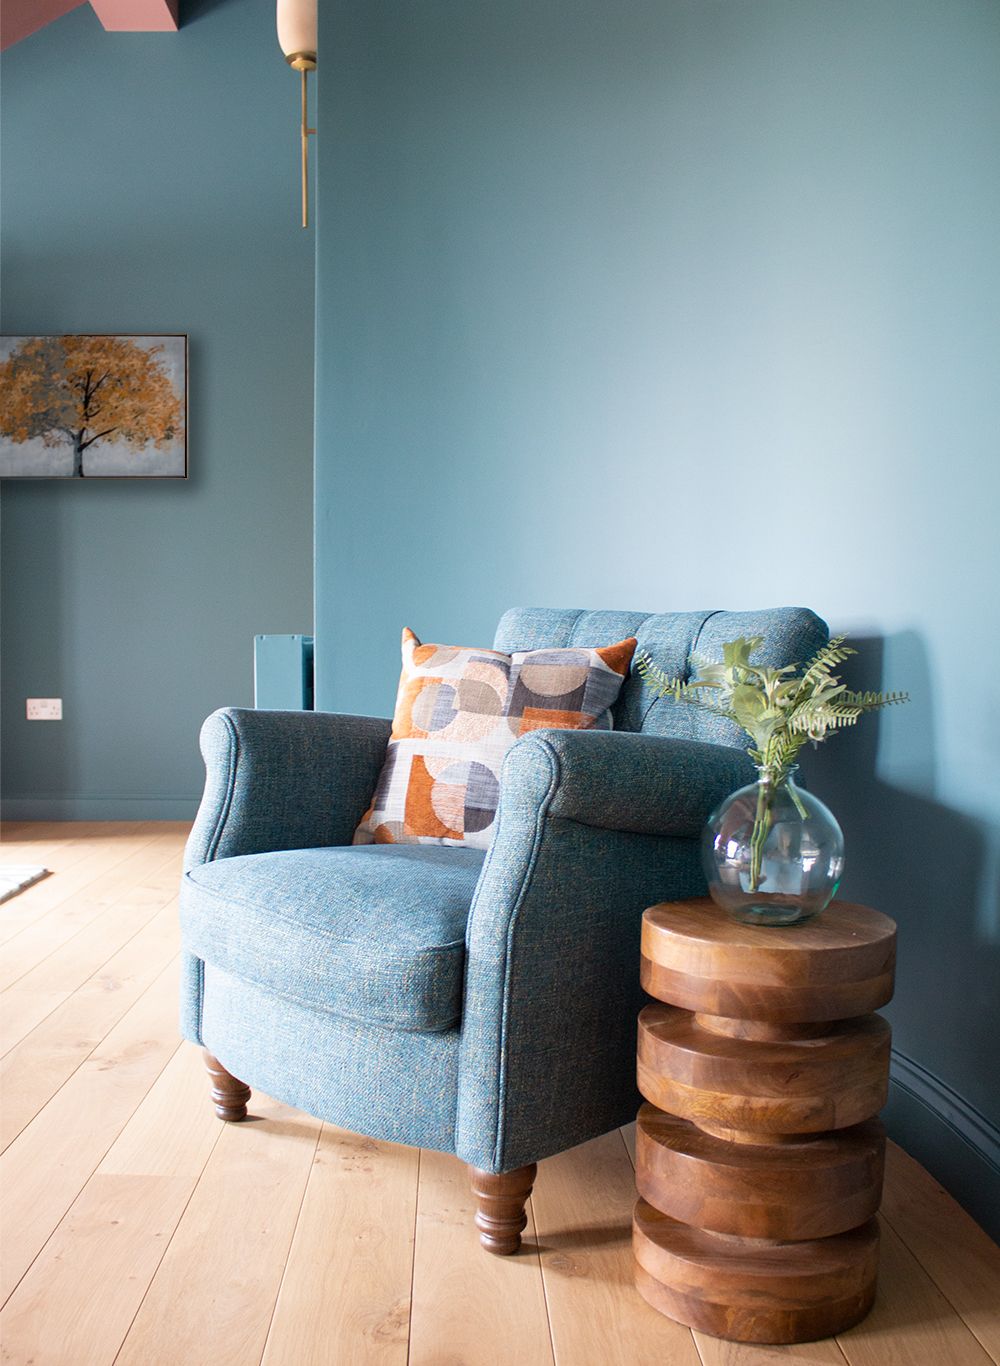 A close up photo of the teal armchair and wooden side table in the main bedroom.